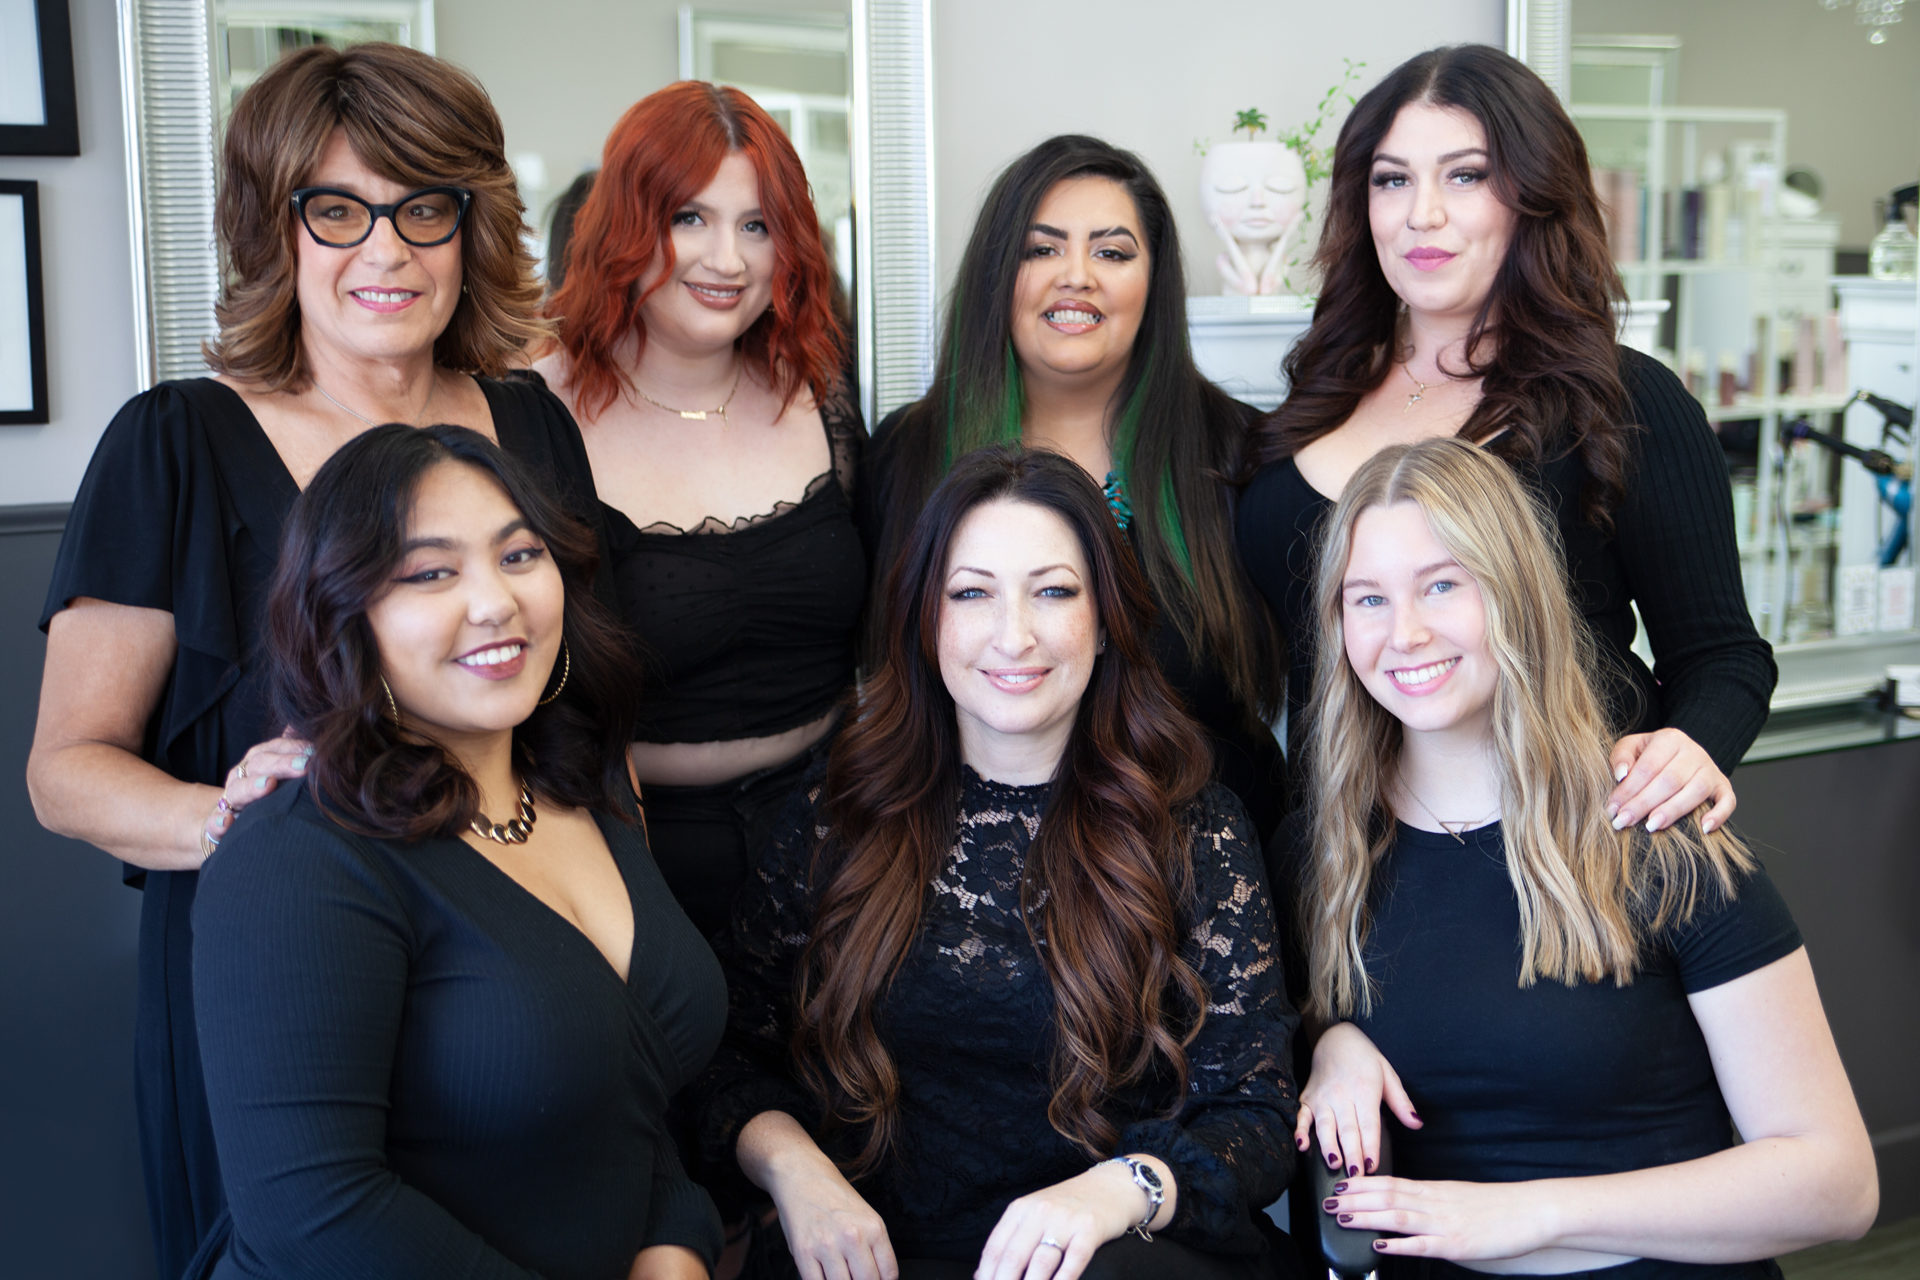 Related Posts: Meet Our Hair Stylists />